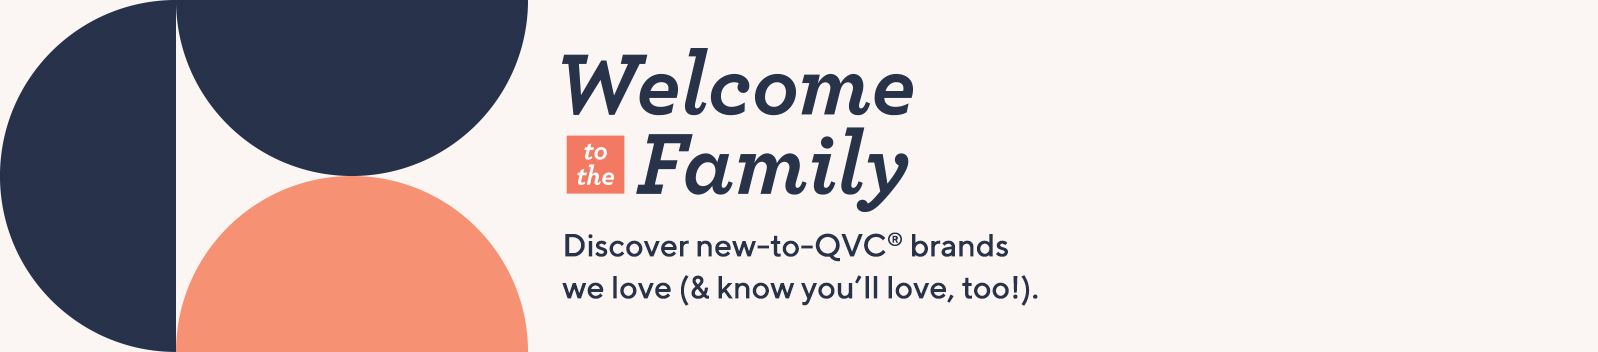 Welcome to the Family. Discover new-to-QVC® brands we love (& know you'll love, too!).